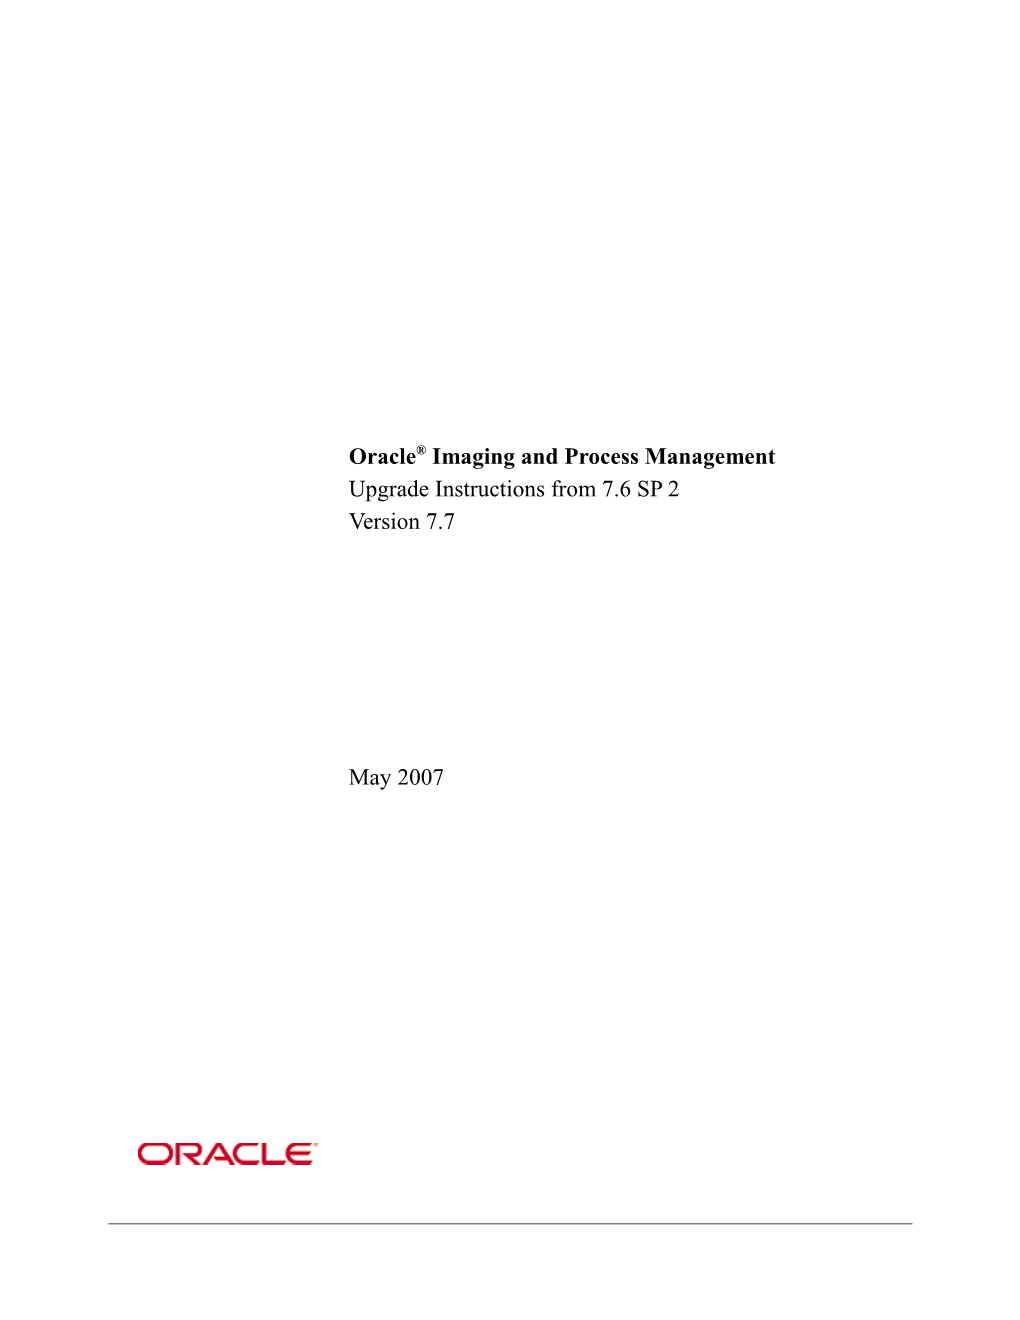 Oracle Imaging and Process Management